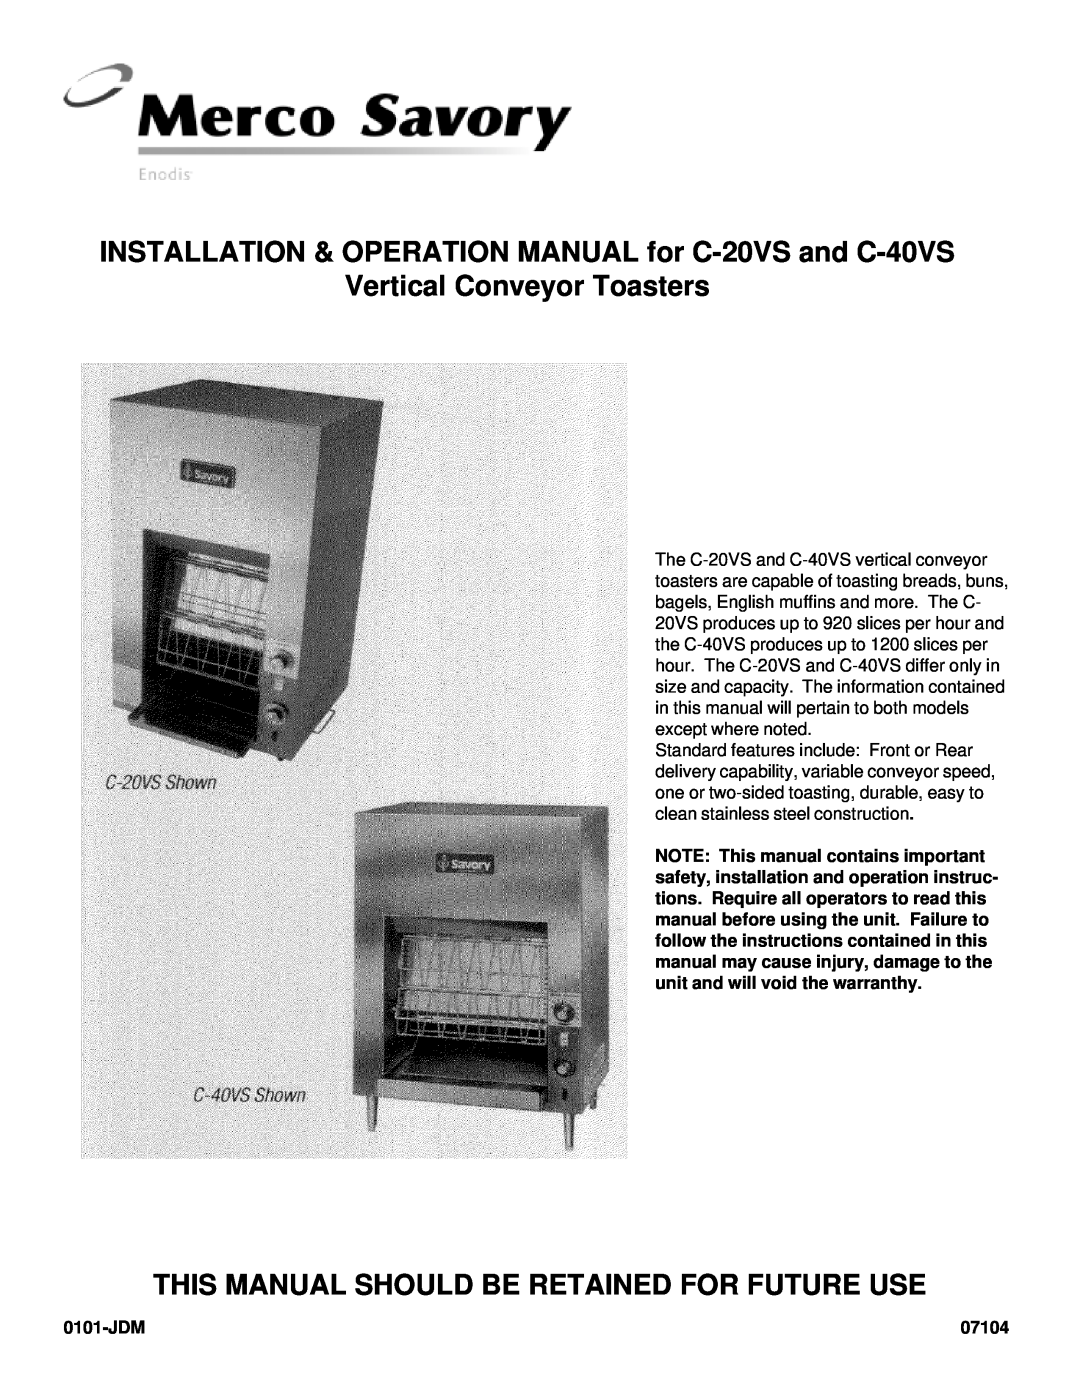 Merco Savory C-20VS, C-40VS operation manual Vertical Conveyor Toasters, This Manual Should Be Retained For Future Use 